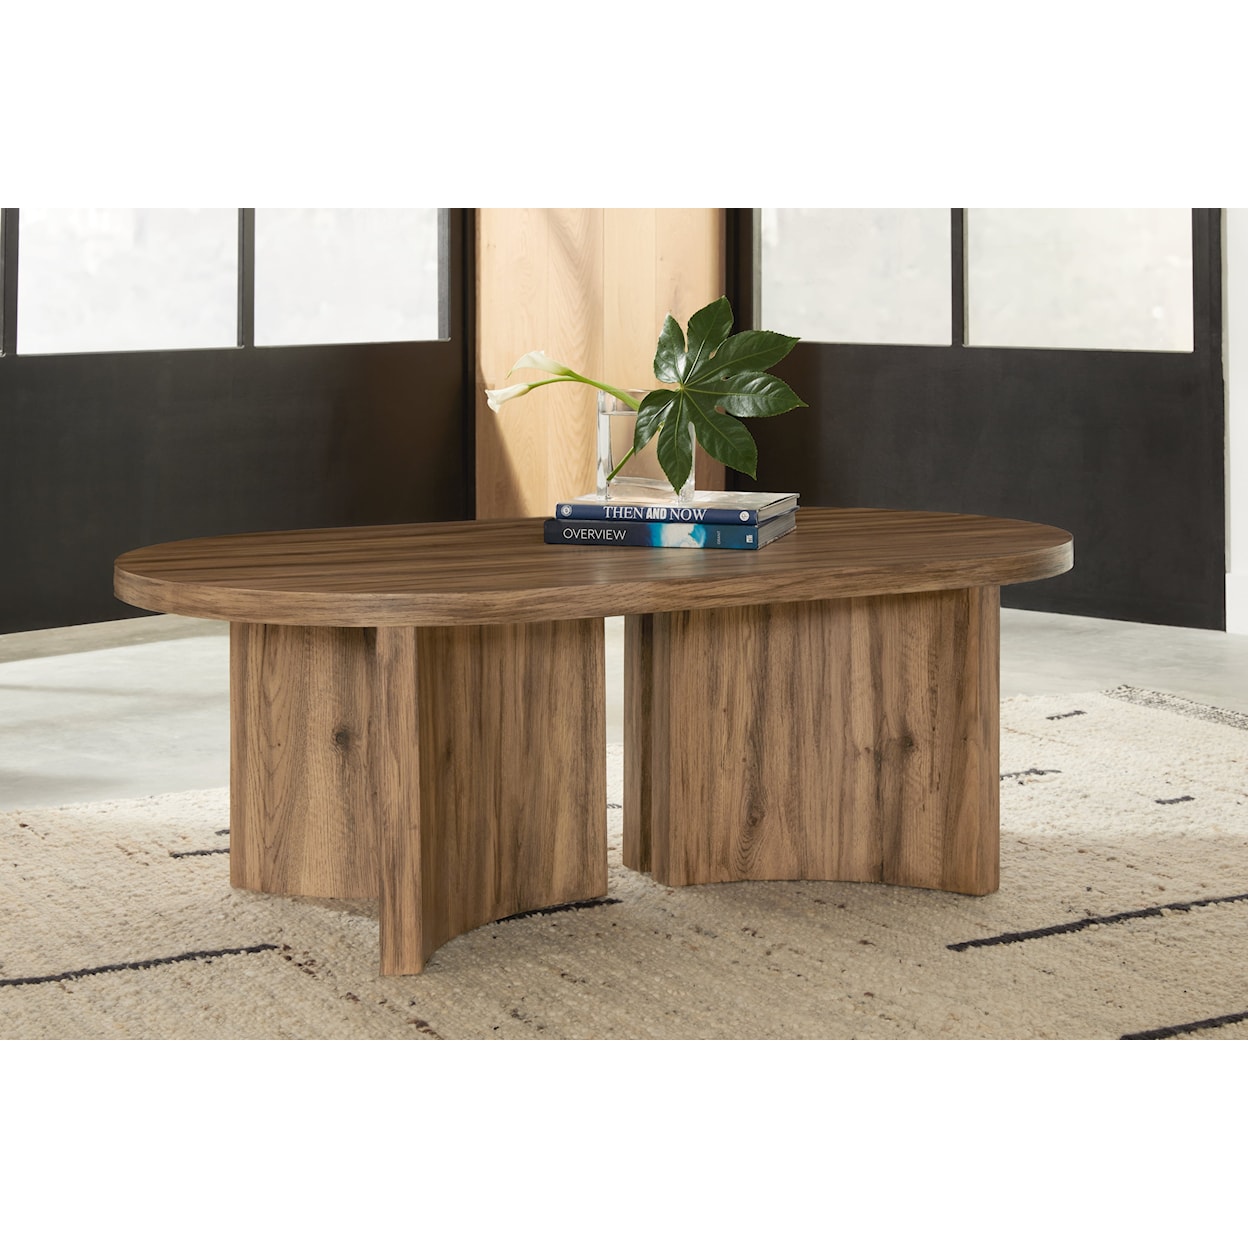 Michael Alan Select Austanny Coffee Table and 2 End Tables